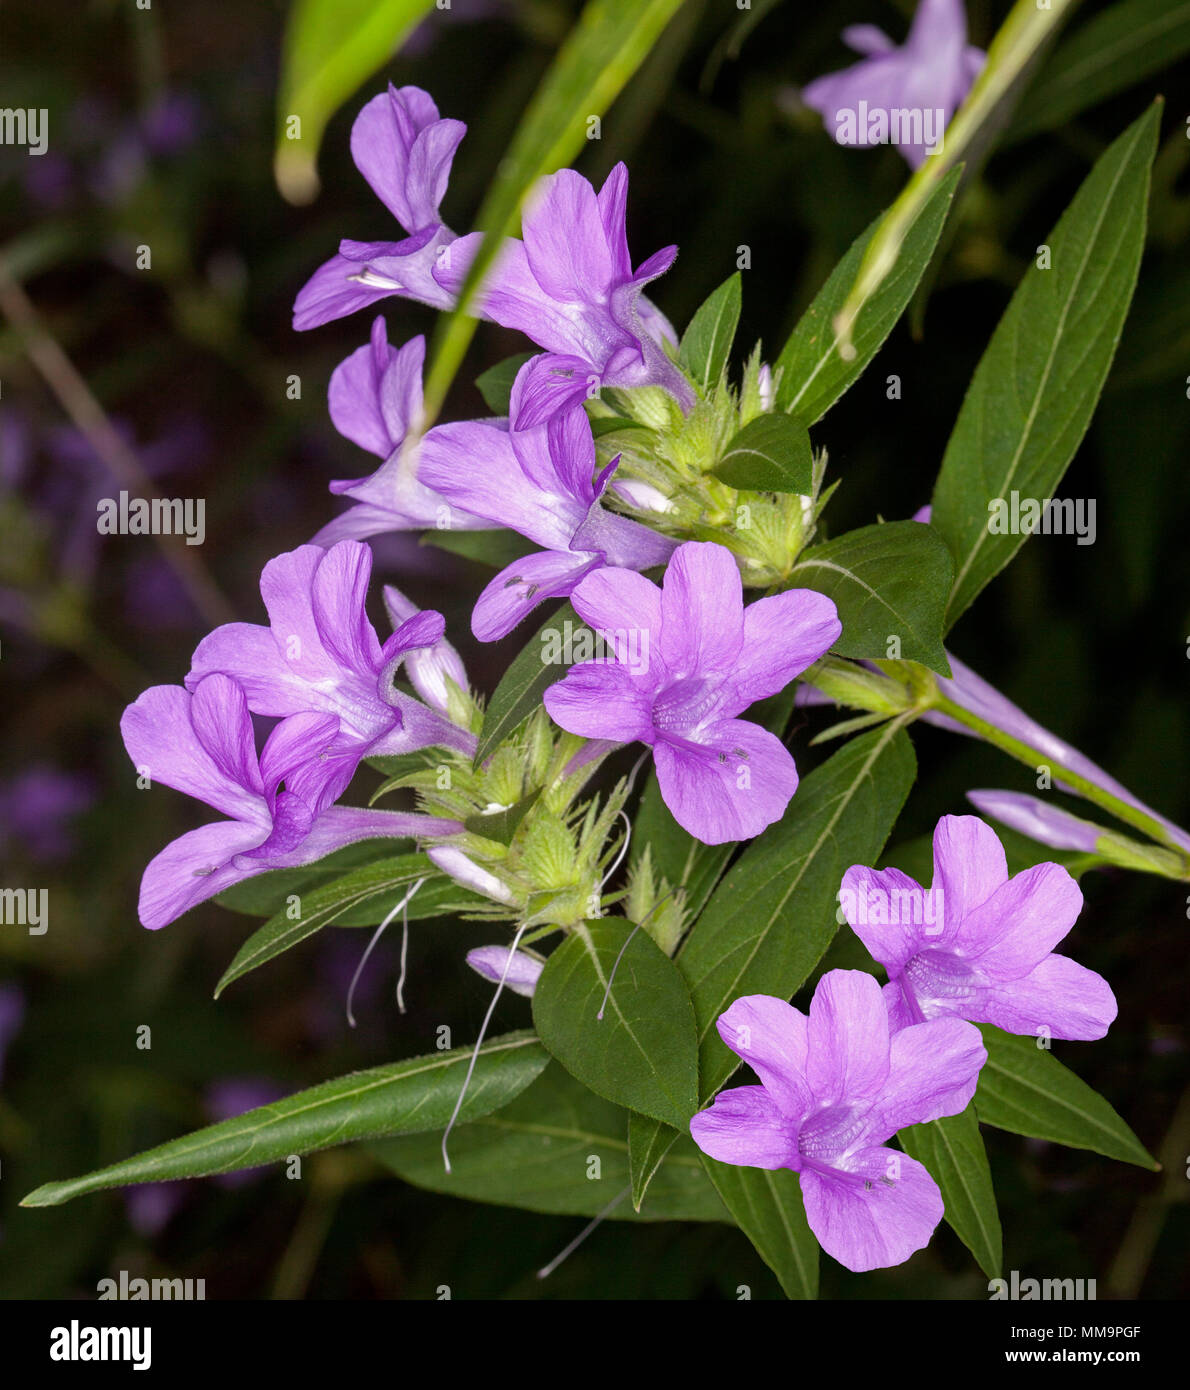 Cluster of beautiful mauve / pink flowers and vivid green leaves of Barleria cristata, Philippines violet, evergreen shrub, on dark background Stock Photo